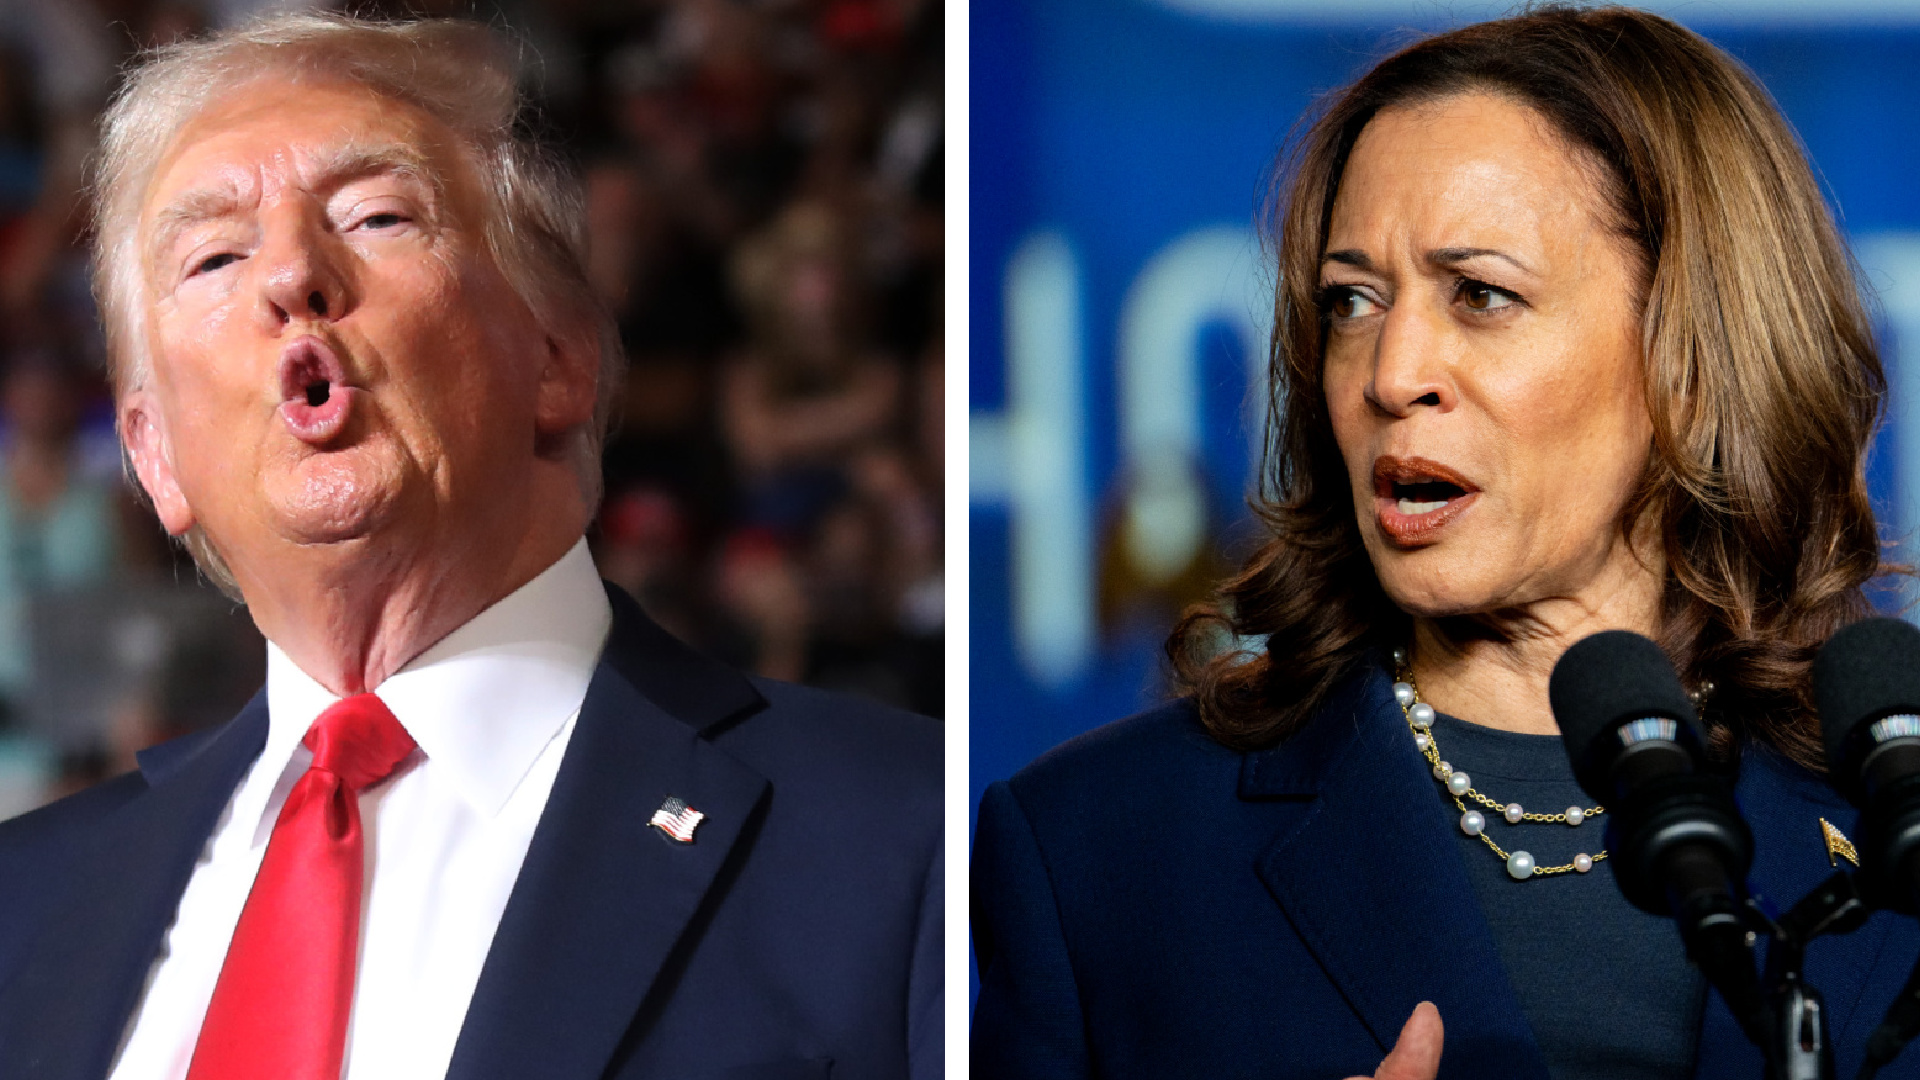 Harris's campaign fires back after Trump's sharp criticism at rally